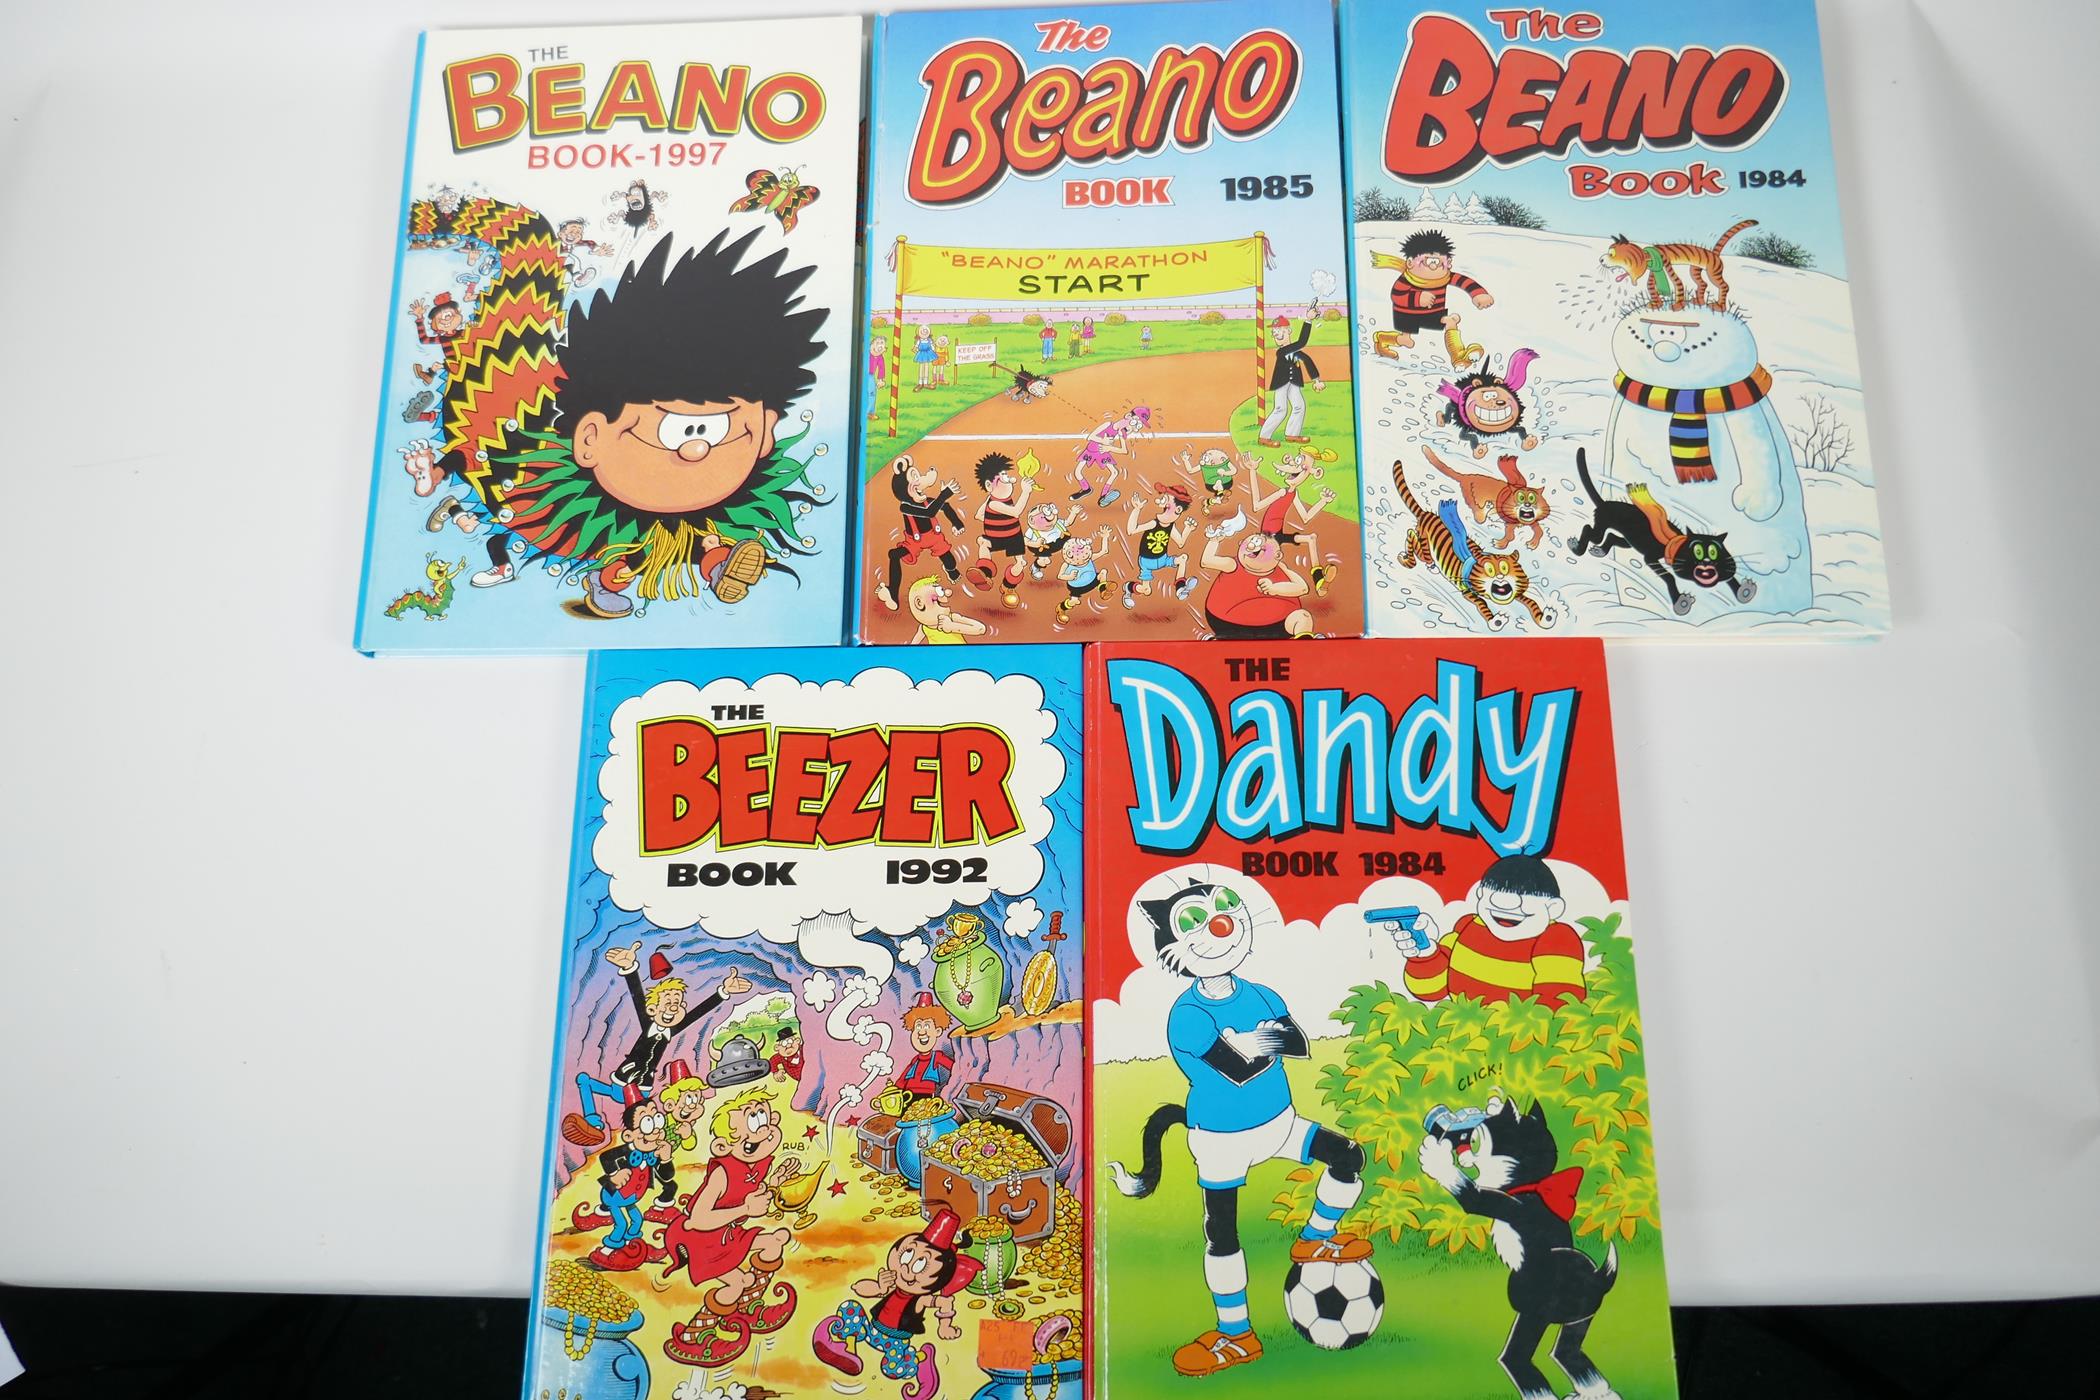 Four children's annuals, The Dandy 1984, The Beano 1984-85 and 1997, and The Beezer 1992